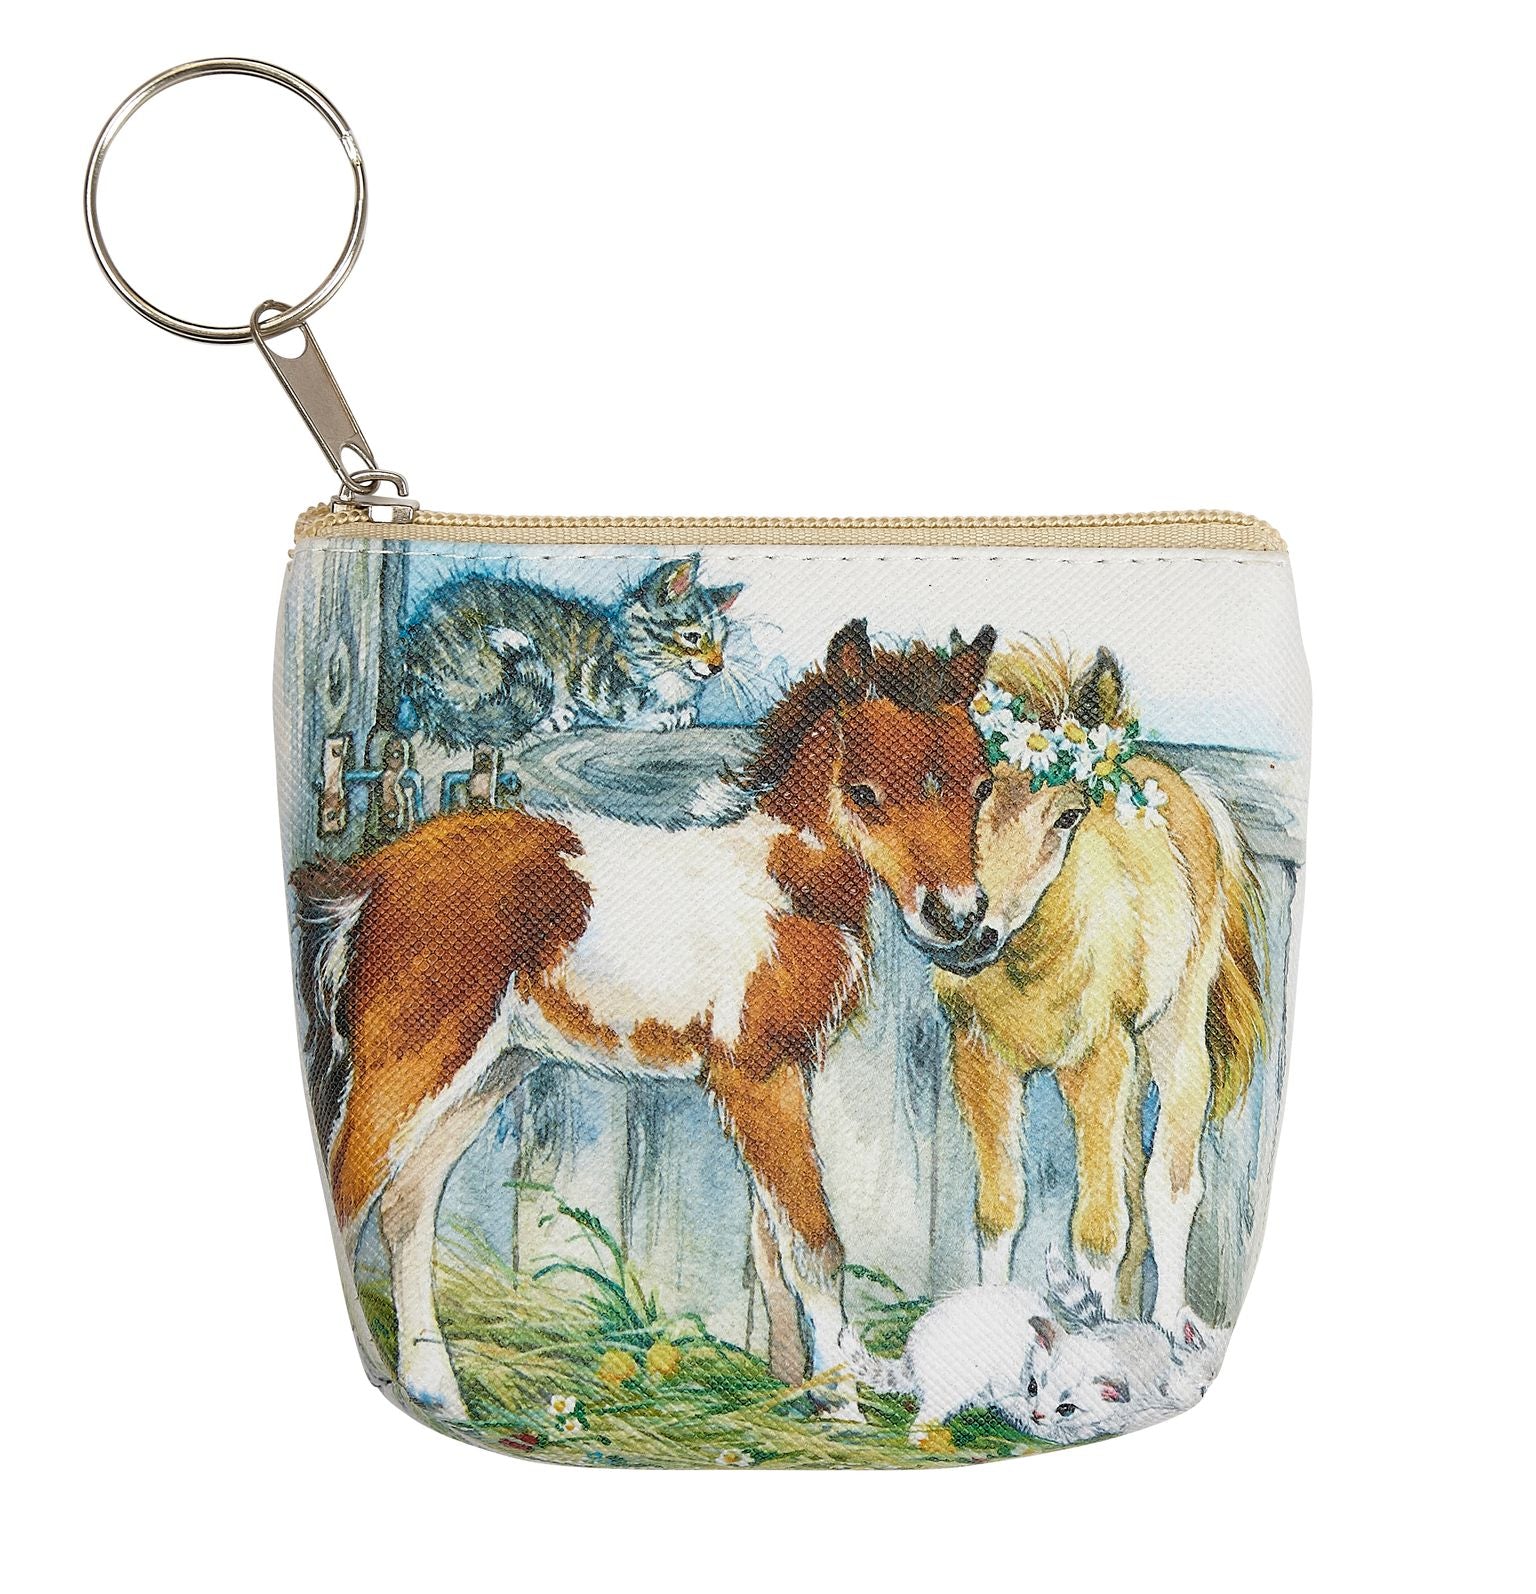 AWST Coin Purses with Cute Foals